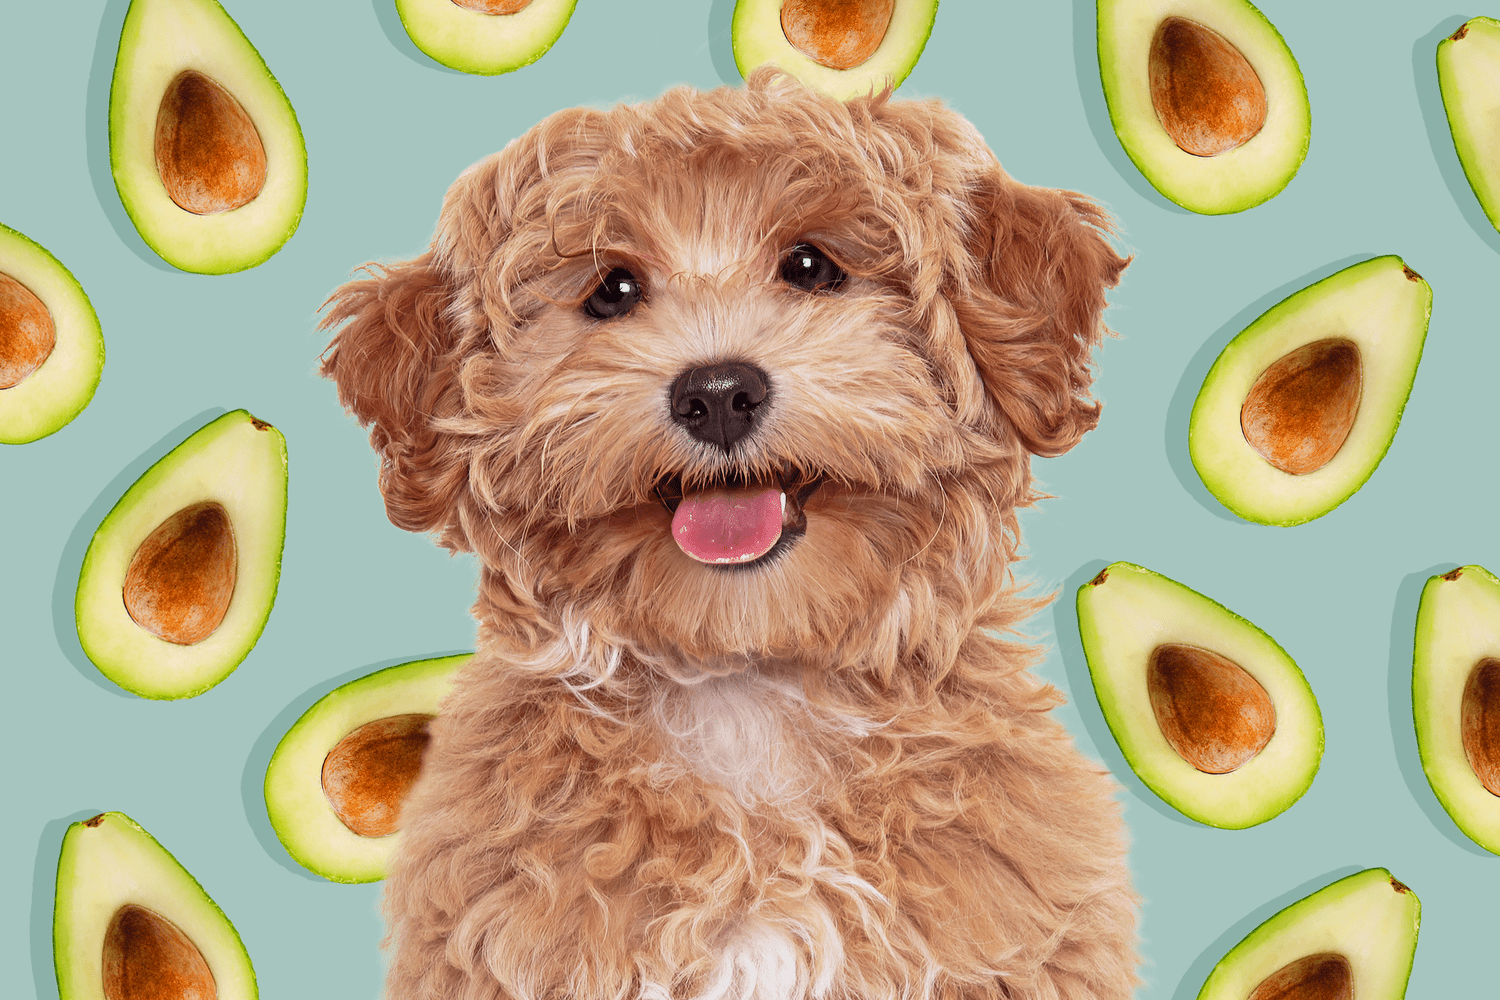 dog with background of avocados; can dogs eat avocado?